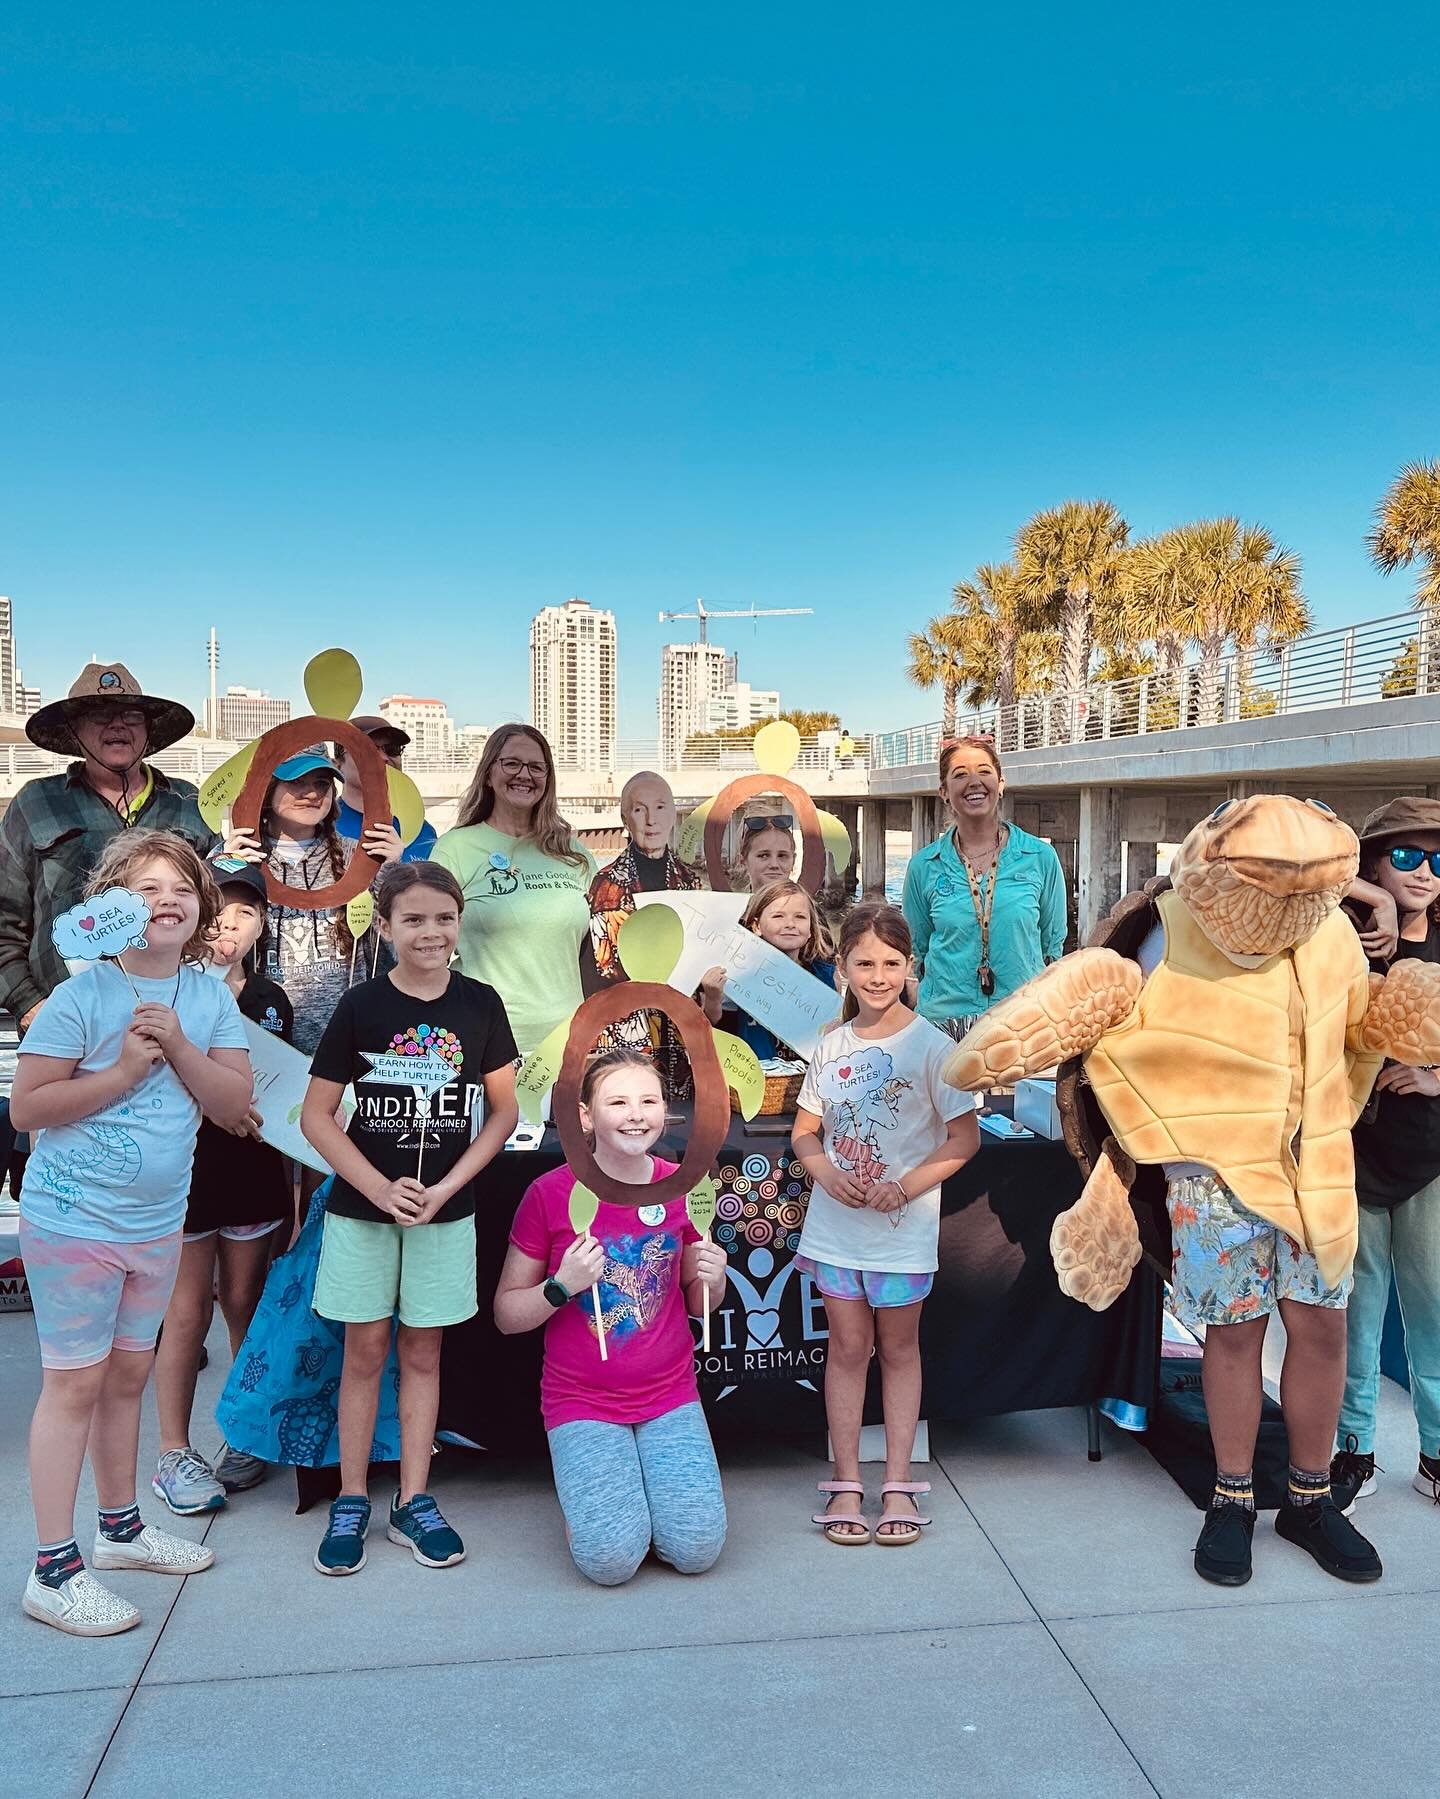 This past weekend we hosted a Turtle Festival in the wet classroom of the Discovery Center in honor of Sea Turtle Awareness Day! 🐢🌊

We welcomed our friends from Indi-ED, Sea Turtle Trackers, and NOAA who brought tons of educational crafts, activit